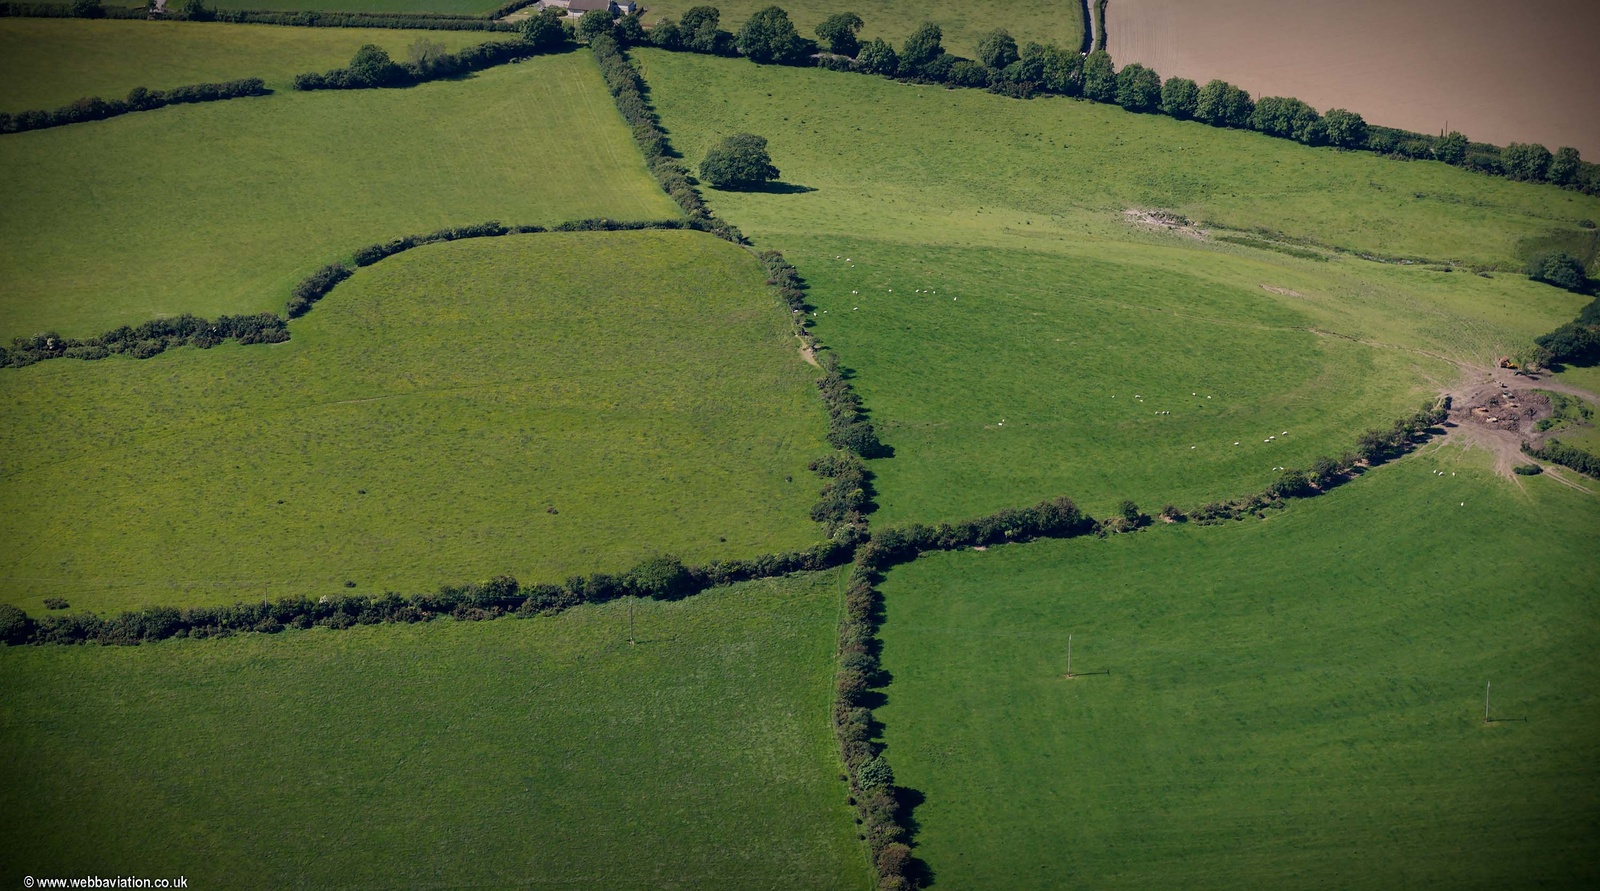 Castell-y-gaer hillfort Carmarthen from the air